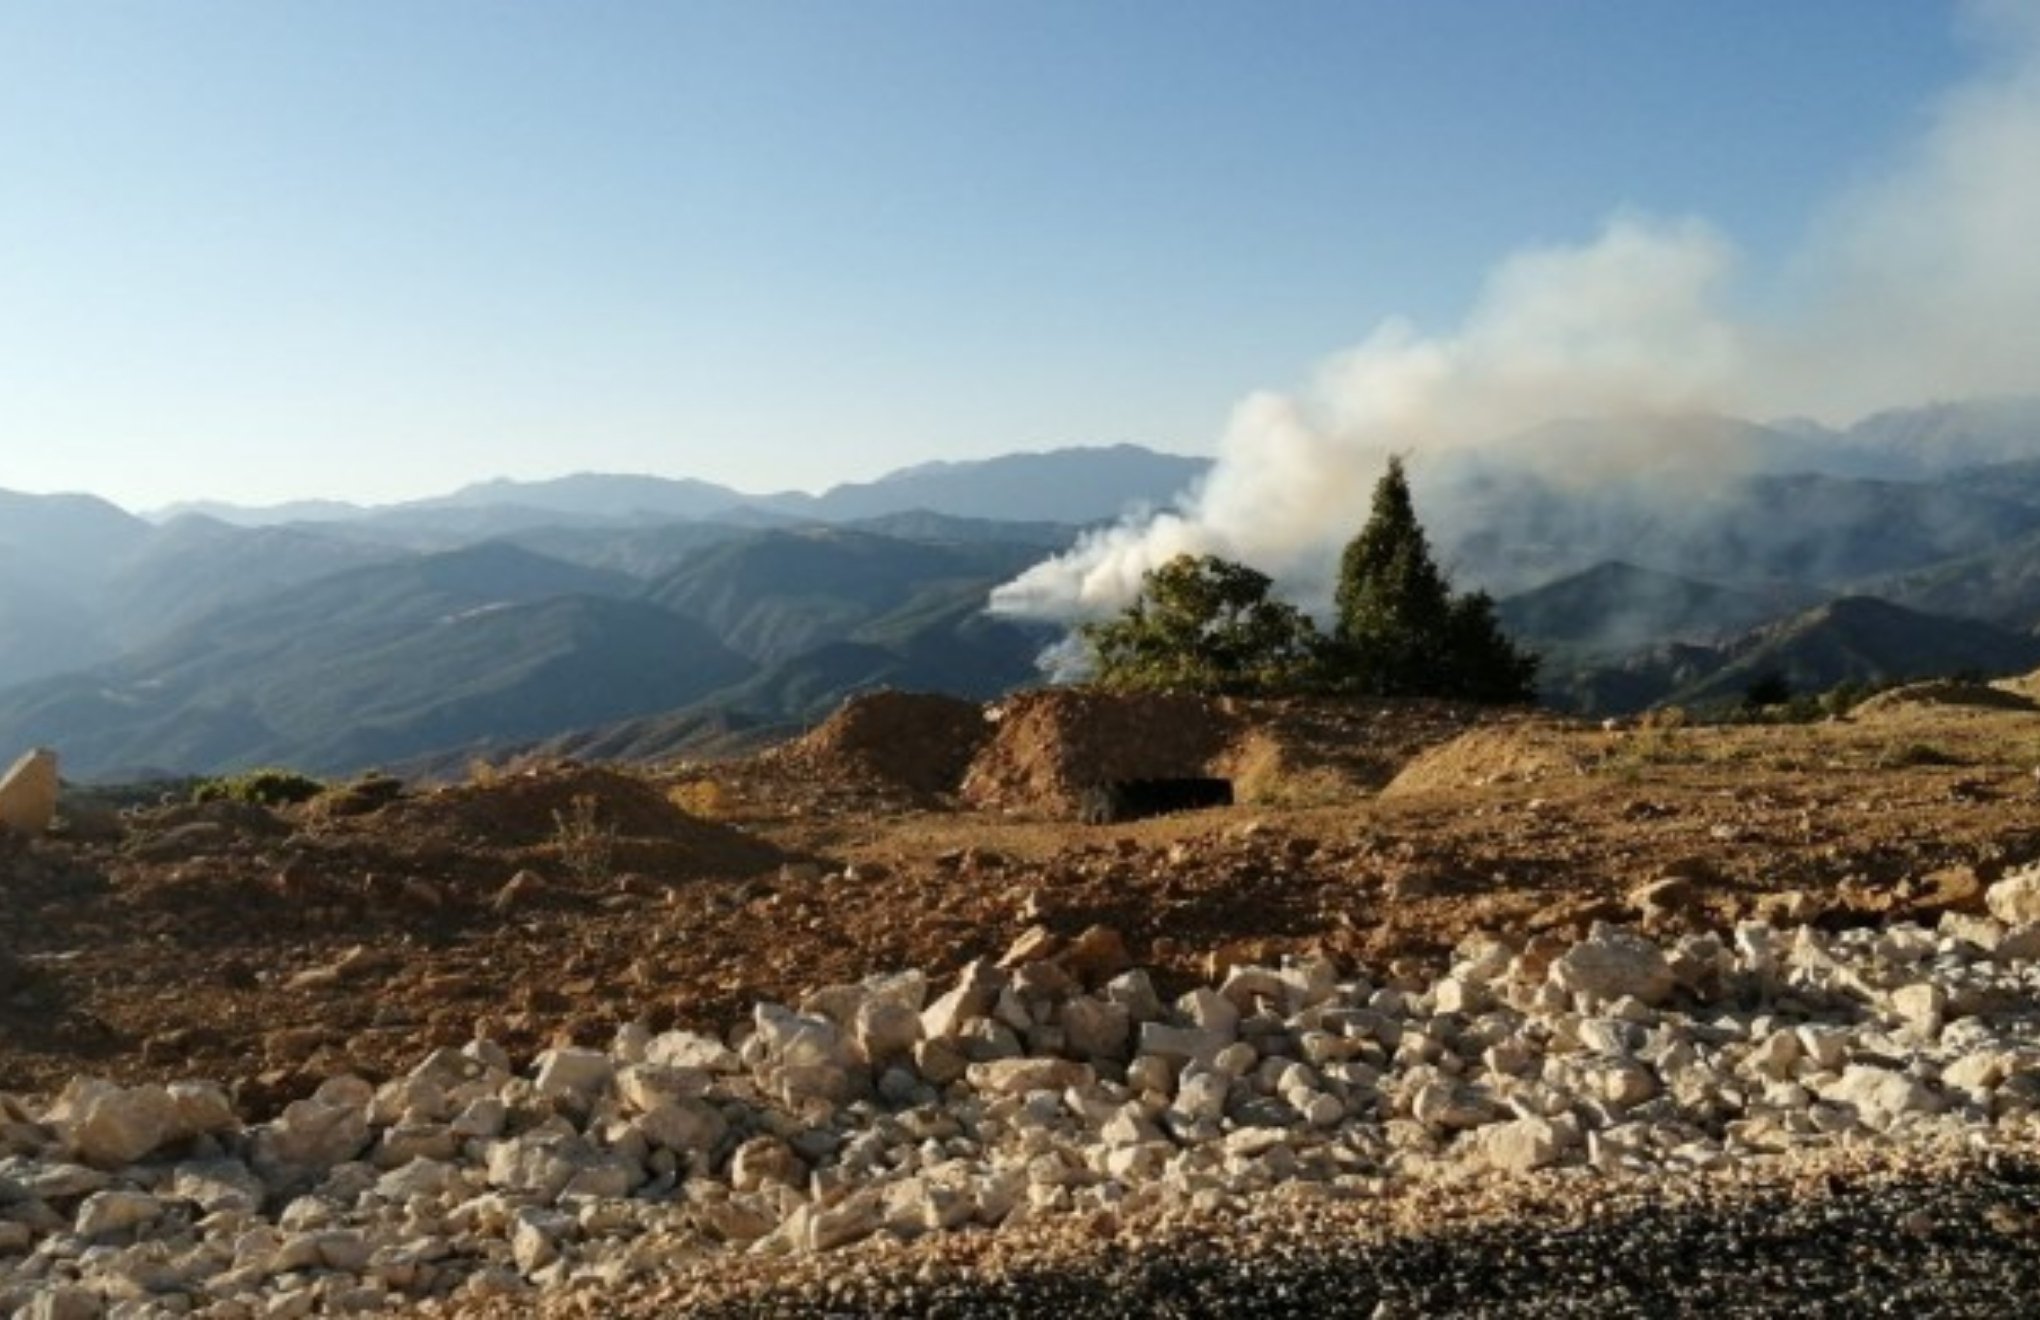 Military operations hamper response to wildfires in Dersim